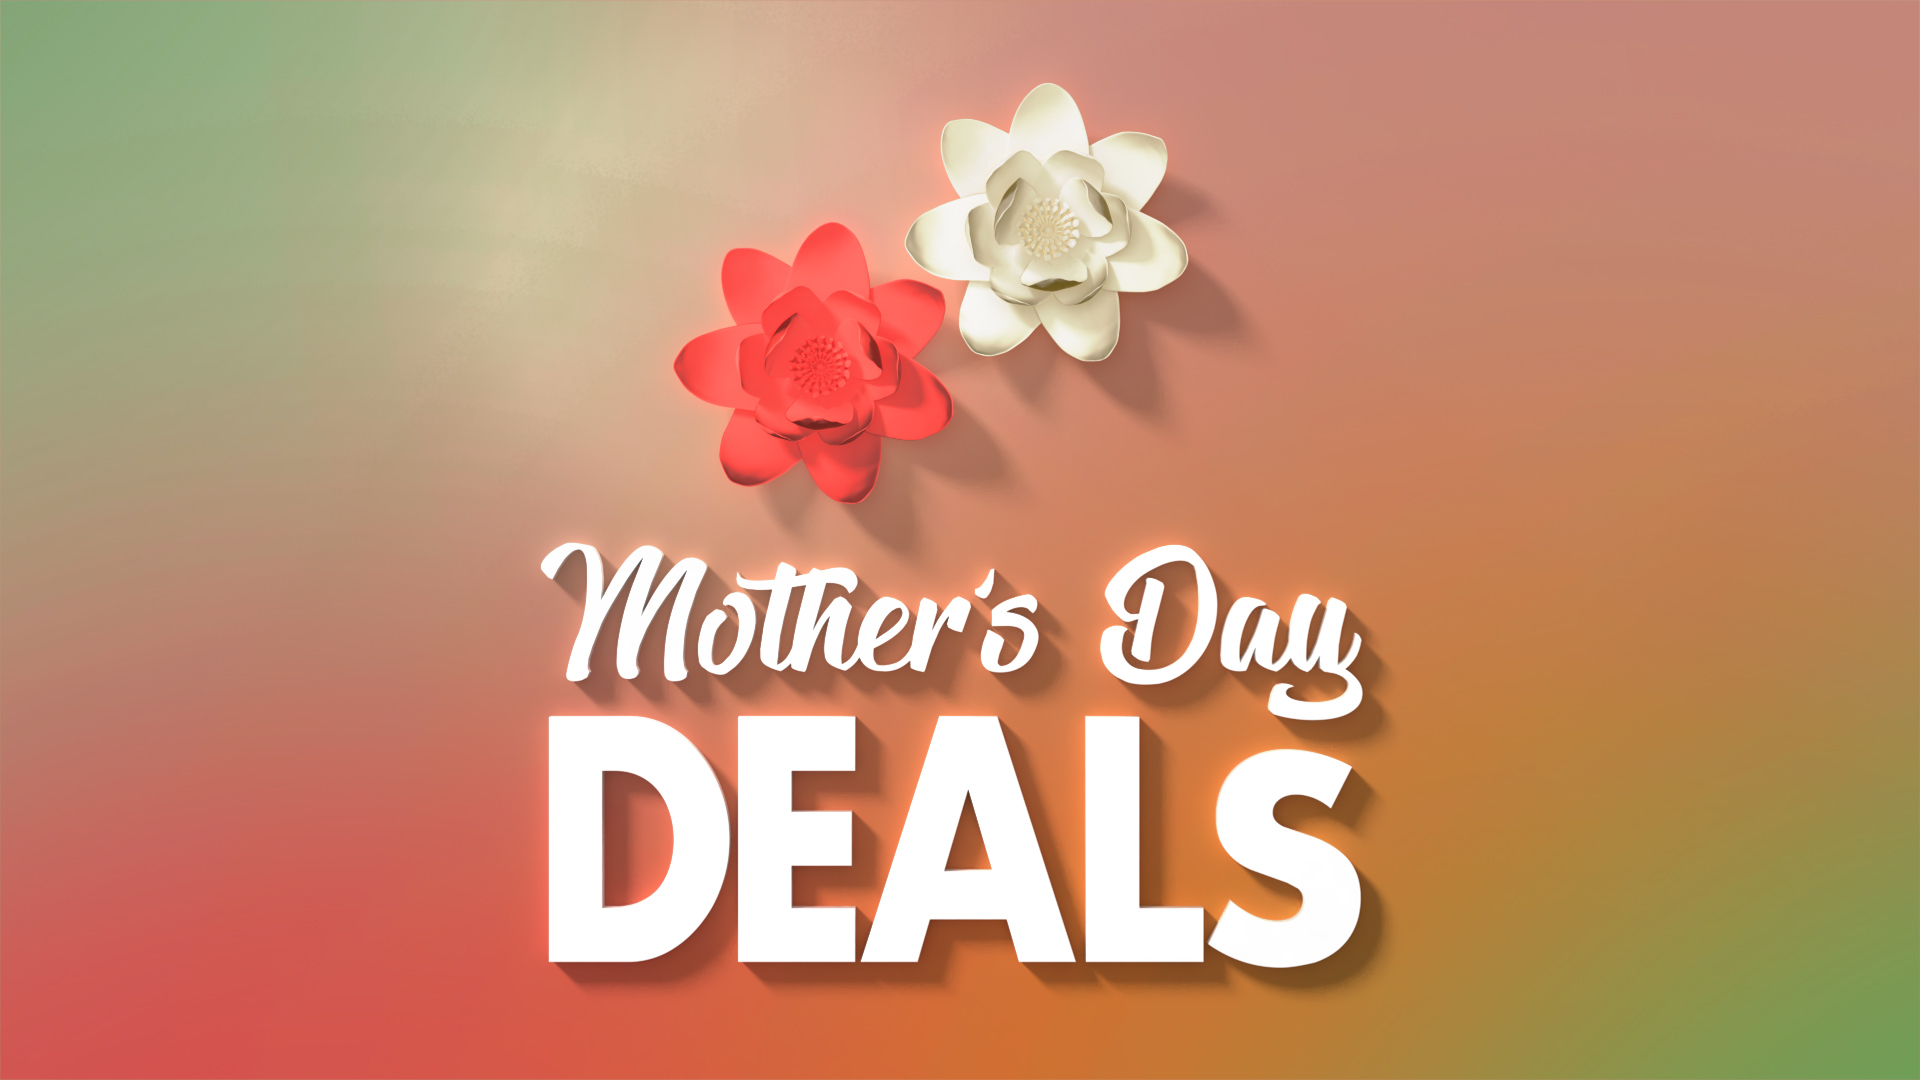 Mother's Day Deals Save on iPhones, AirPods, Cases, Charging